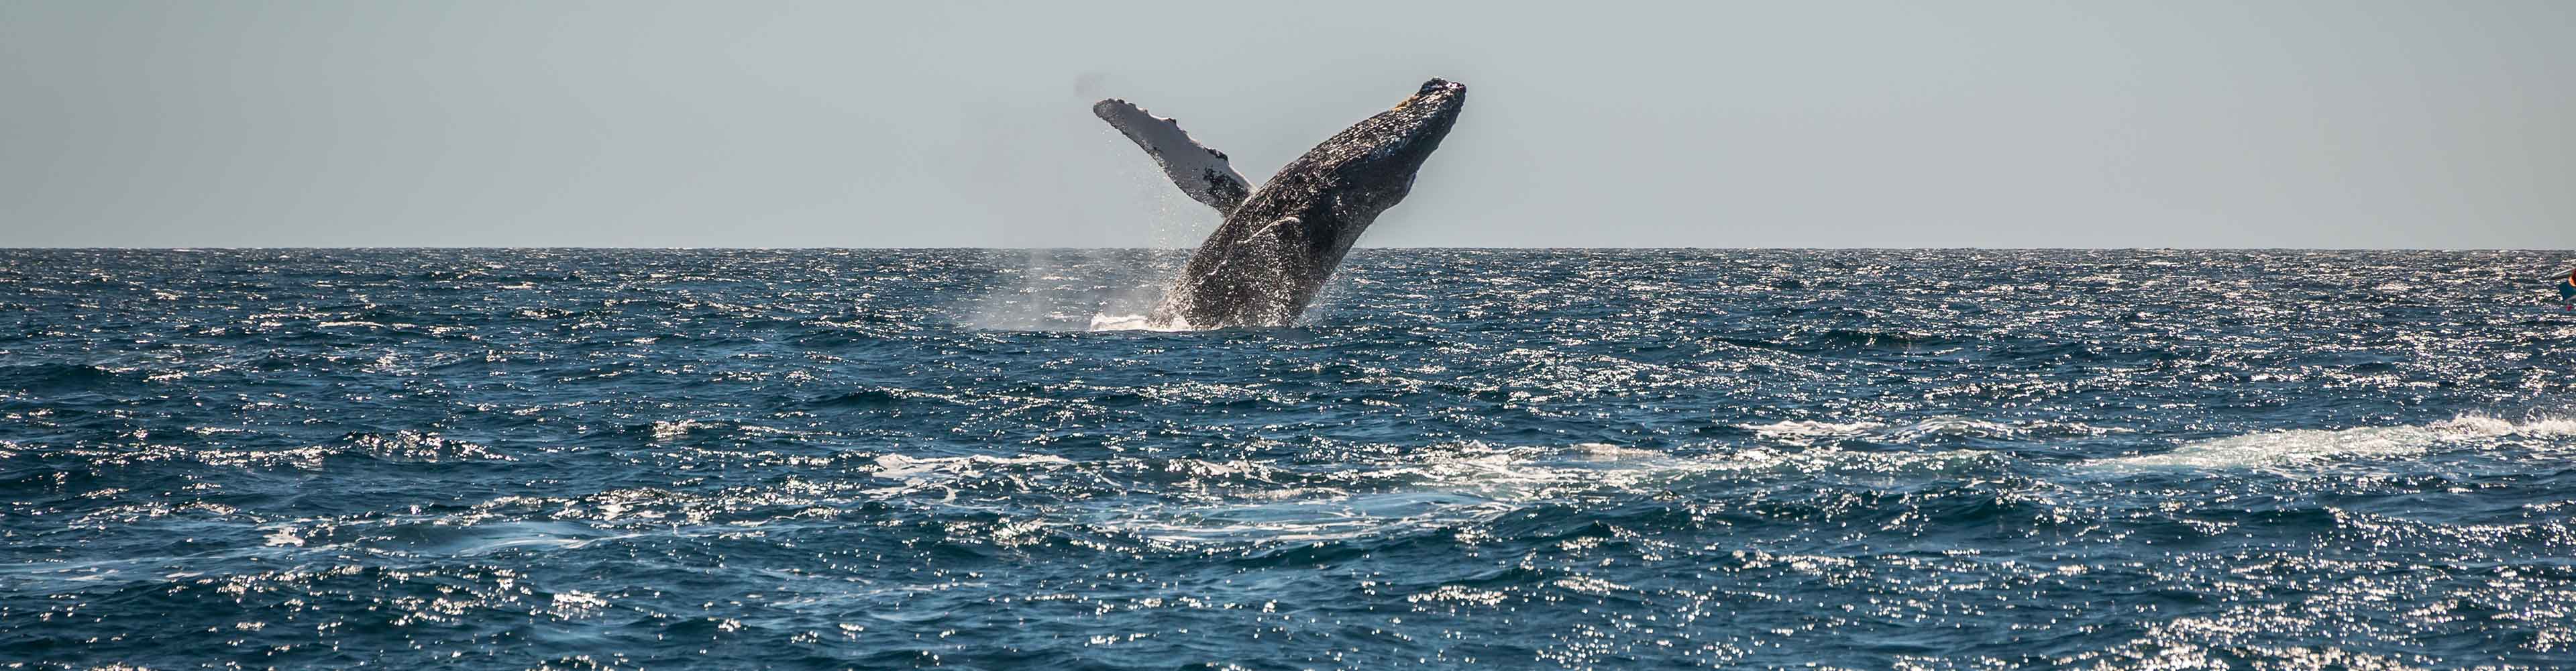 Mexico Sailing & Whale Watching Expedition